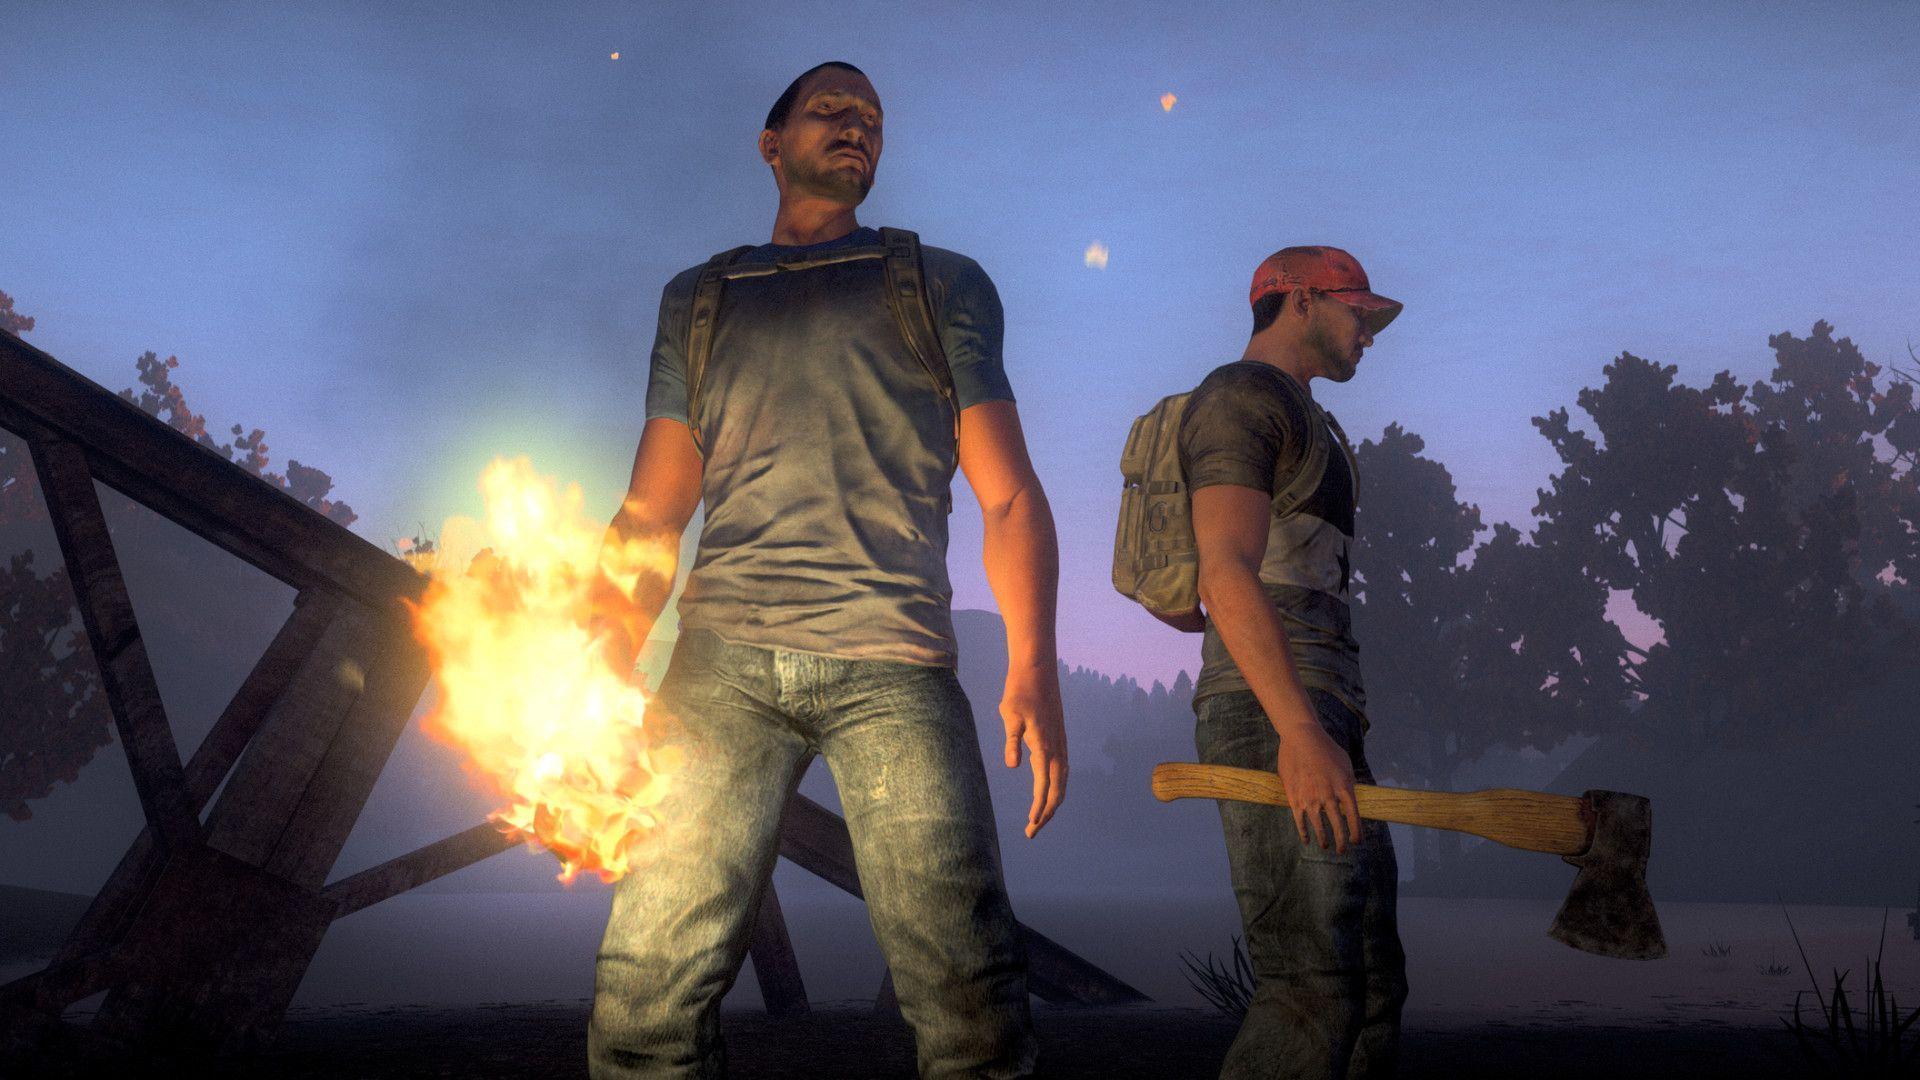 H1Z1: King of the Kill + Just Survive Steam Buy Online. DL2Play